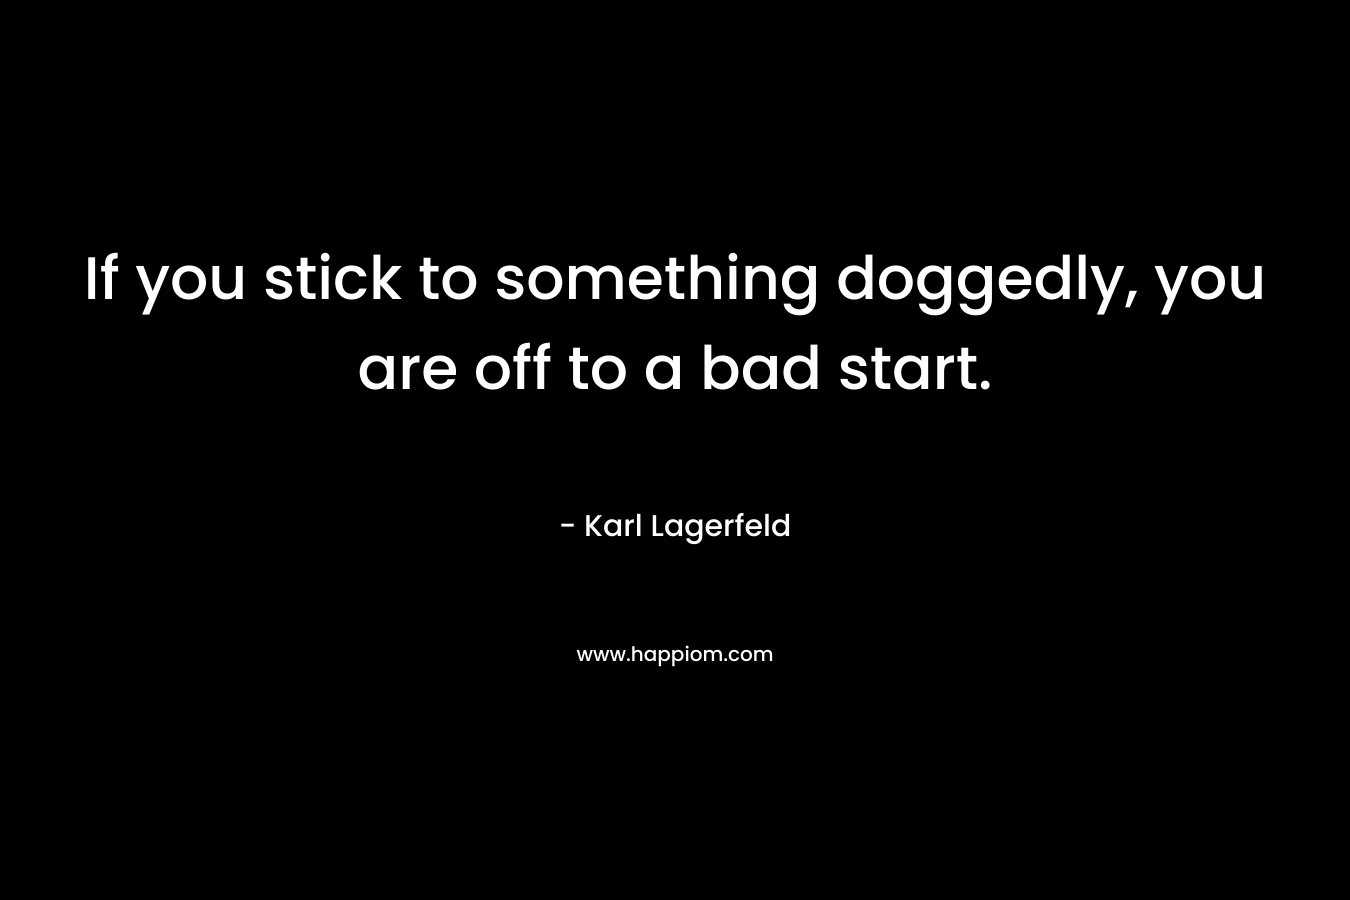 If you stick to something doggedly, you are off to a bad start.